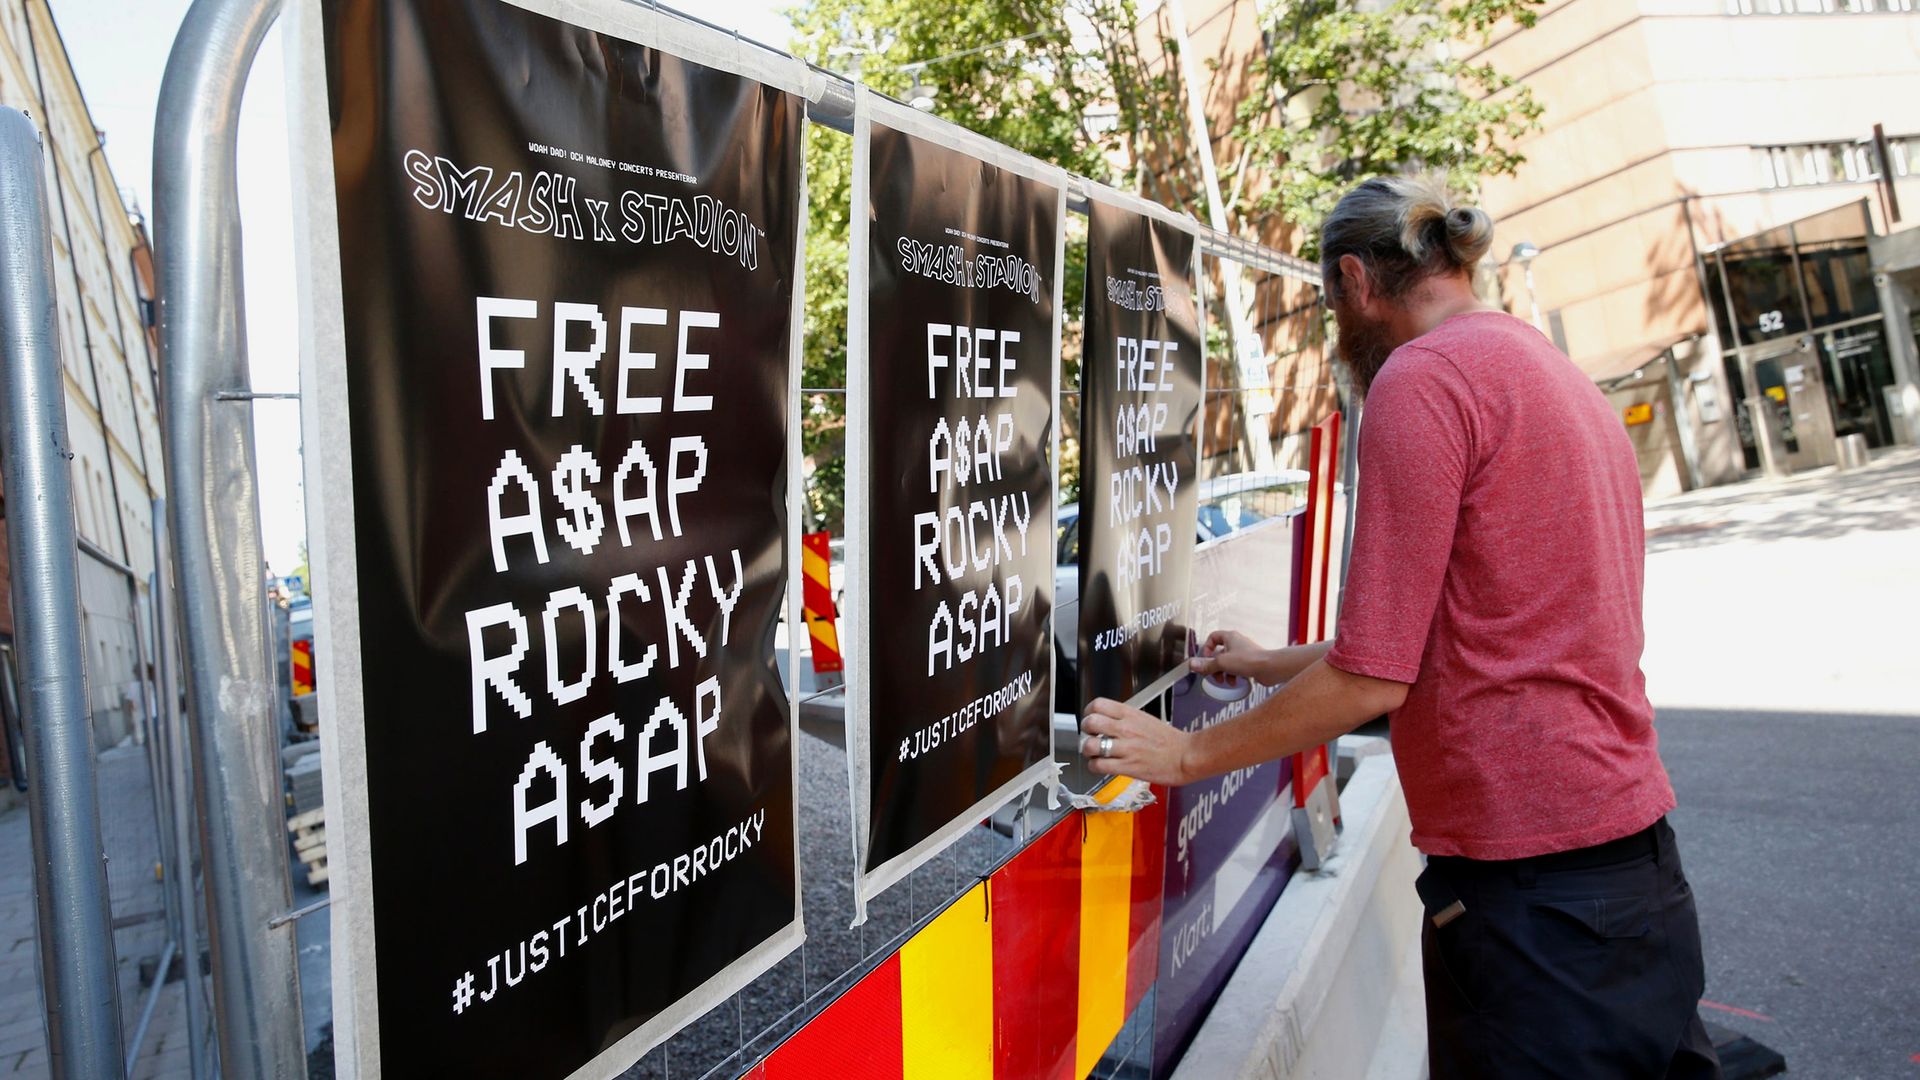 Posters in support of A$AP Rocky